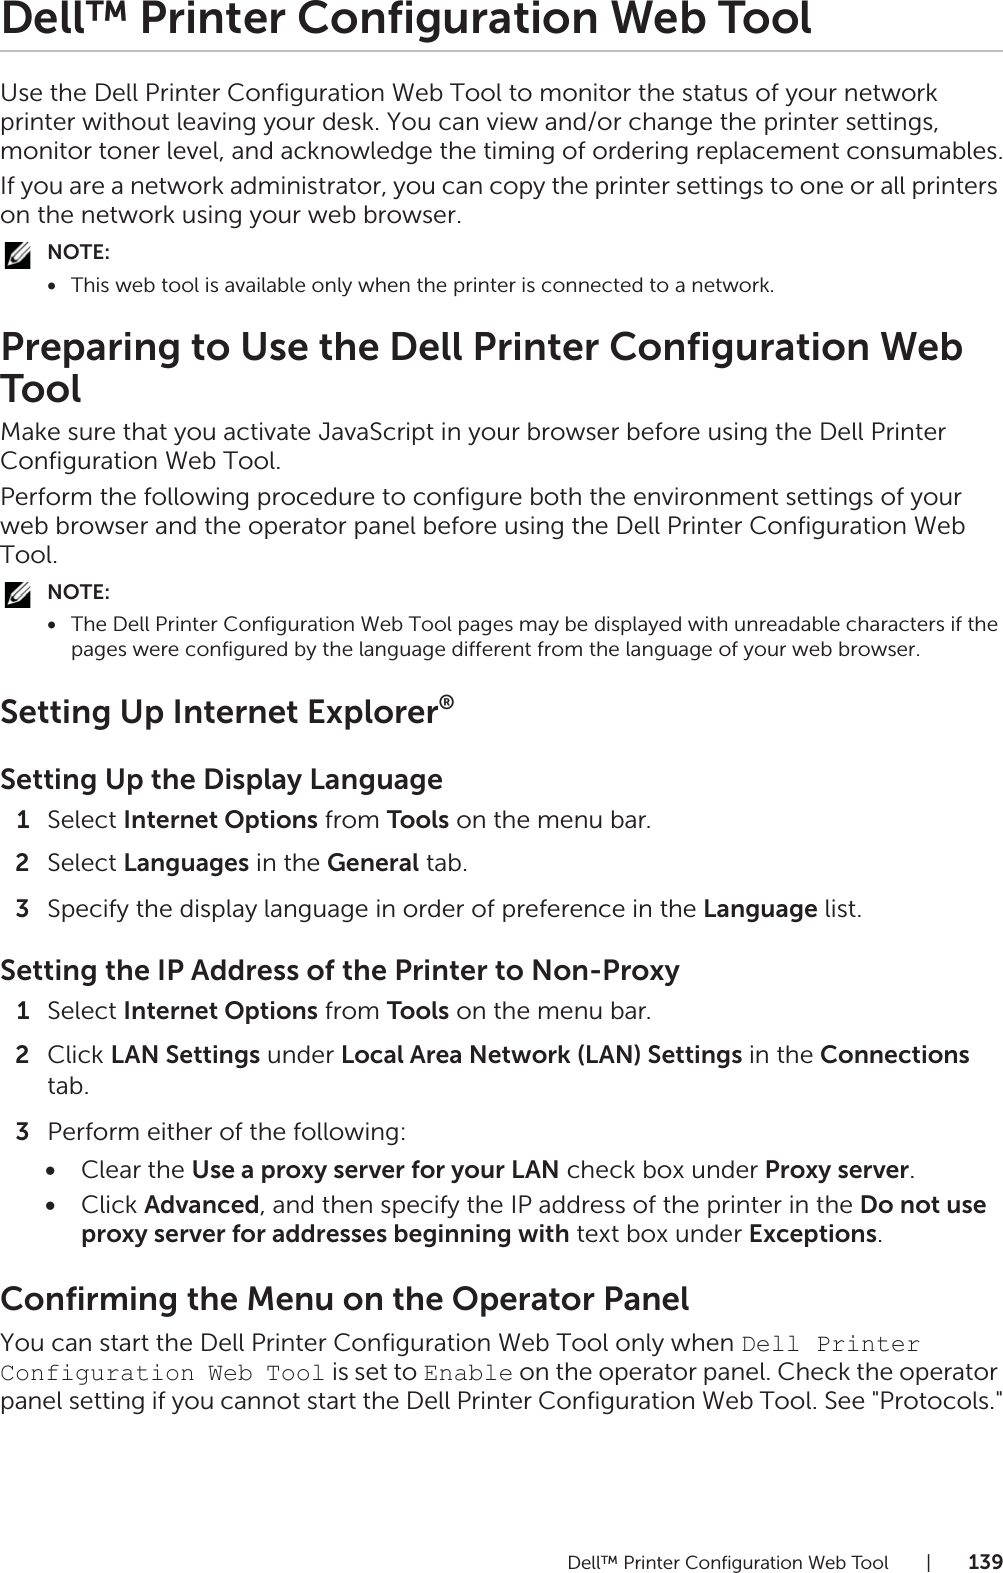 Dell™ Printer Configuration Web Tool |139Dell™ Printer Configuration Web ToolUse the Dell Printer Configuration Web Tool to monitor the status of your network printer without leaving your desk. You can view and/or change the printer settings, monitor toner level, and acknowledge the timing of ordering replacement consumables.If you are a network administrator, you can copy the printer settings to one or all printers on the network using your web browser.NOTE:•This web tool is available only when the printer is connected to a network.Preparing to Use the Dell Printer Configuration Web ToolMake sure that you activate JavaScript in your browser before using the Dell Printer Configuration Web Tool.Perform the following procedure to configure both the environment settings of your web browser and the operator panel before using the Dell Printer Configuration Web Tool.NOTE:•The Dell Printer Configuration Web Tool pages may be displayed with unreadable characters if the pages were configured by the language different from the language of your web browser.Setting Up Internet Explorer®Setting Up the Display Language1Select Internet Options from Tools on the menu bar.2Select Languages in the General tab.3Specify the display language in order of preference in the Language list.Setting the IP Address of the Printer to Non-Proxy1Select Internet Options from Tools on the menu bar.2Click LAN Settings under Local Area Network (LAN) Settings in the Connections tab.3Perform either of the following:•Clear the Use a proxy server for your LAN check box under Proxy server.•Click Advanced, and then specify the IP address of the printer in the Do not use proxy server for addresses beginning with text box under Exceptions.Confirming the Menu on the Operator PanelYou can start the Dell Printer Configuration Web Tool only when Dell Printer Configuration Web Tool is set to Enable on the operator panel. Check the operator panel setting if you cannot start the Dell Printer Configuration Web Tool. See &quot;Protocols.&quot;